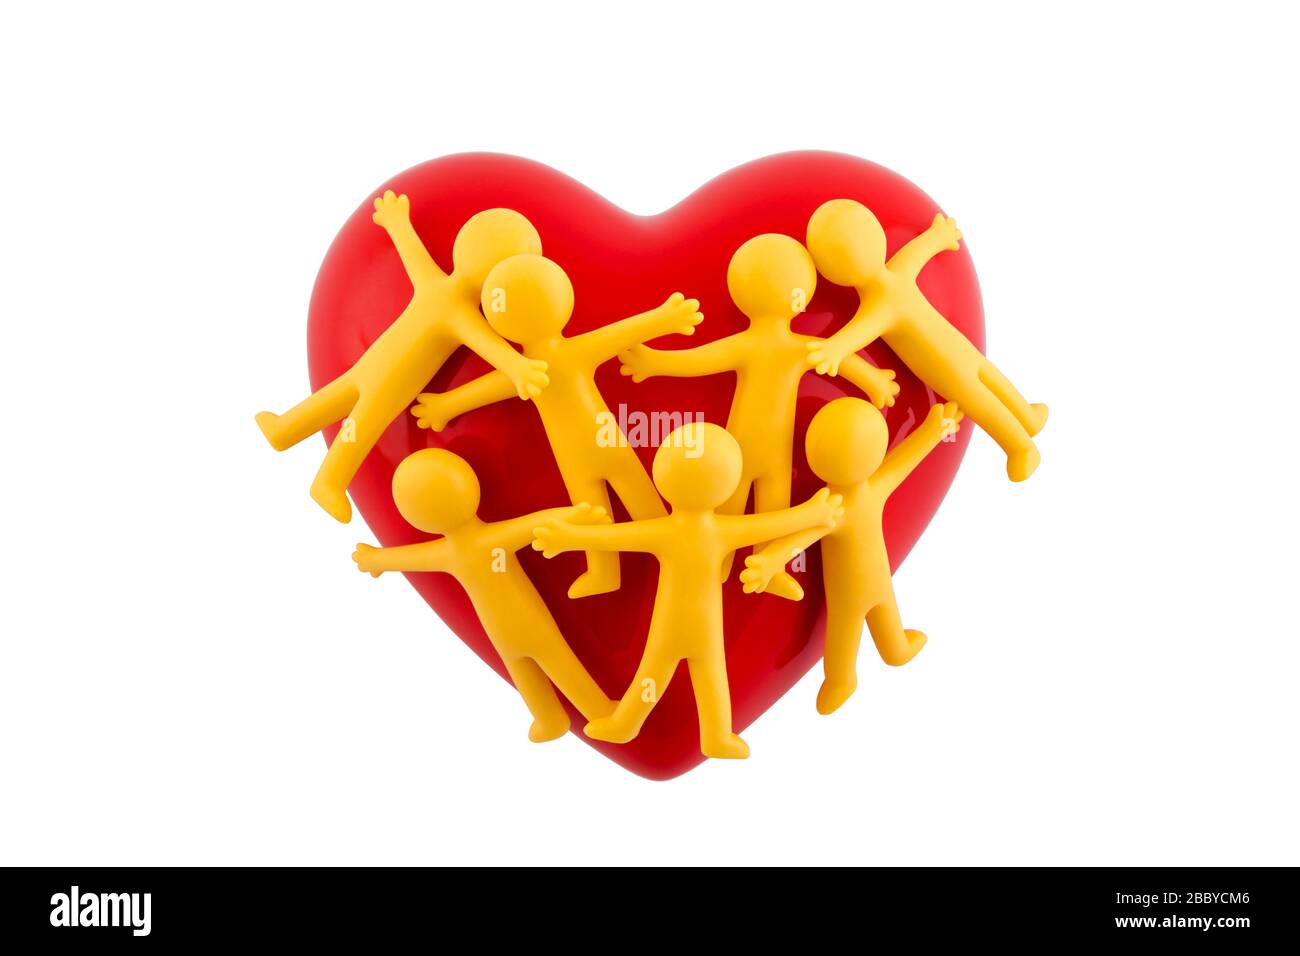 Group of people figures sticking together with red heart isolated on white background with clipping path Stock Photo